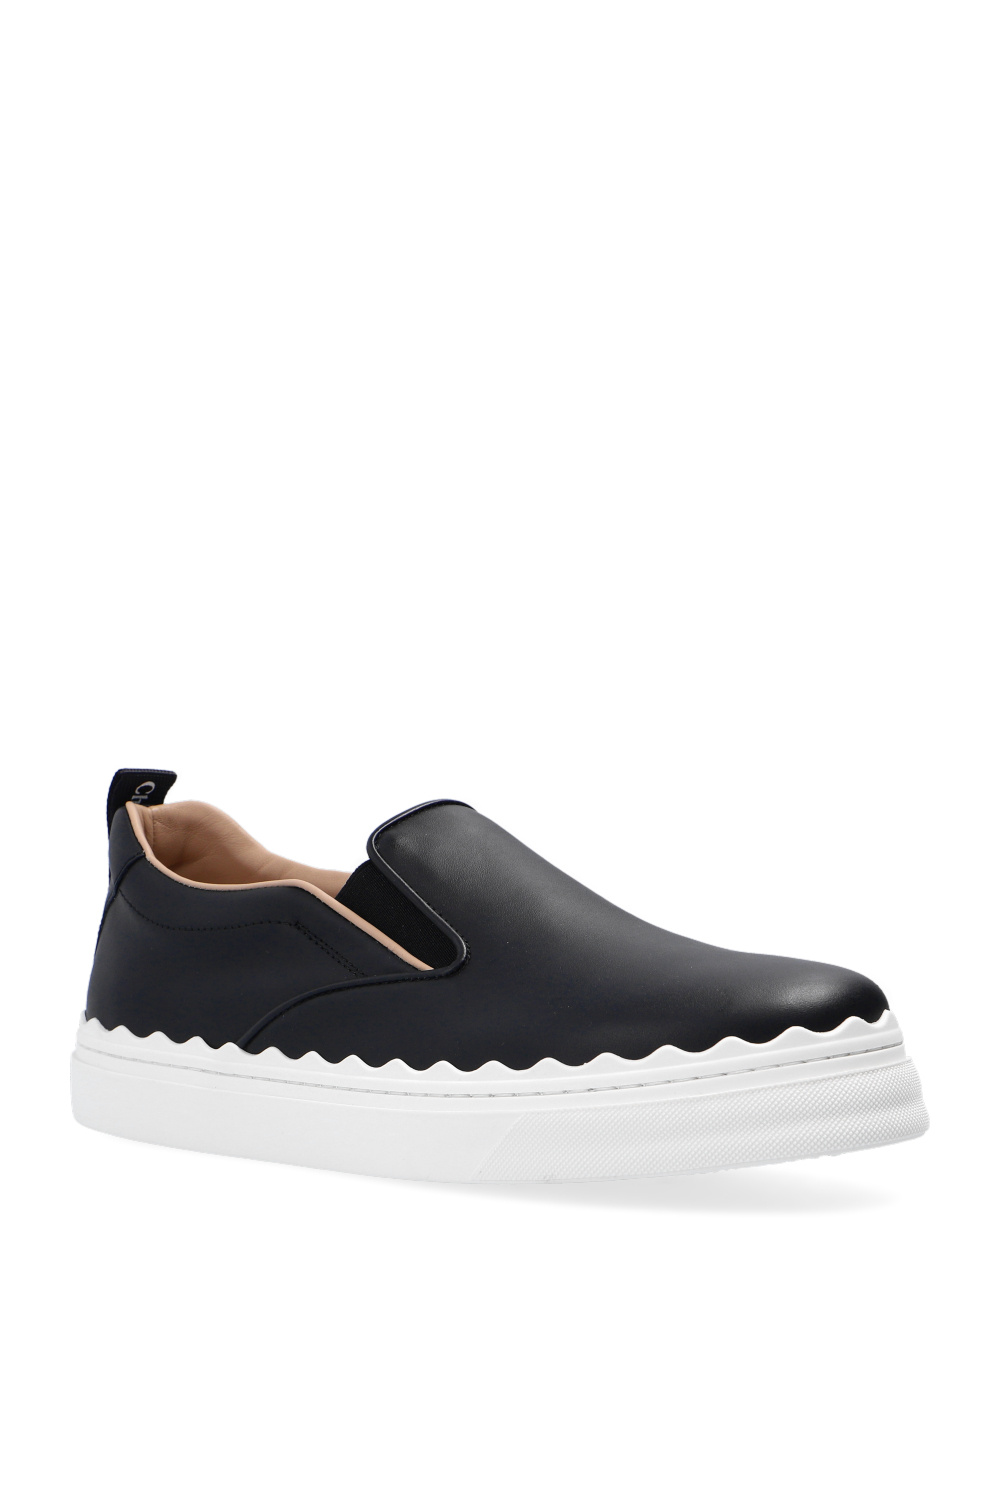 Chloé Leather sneakers